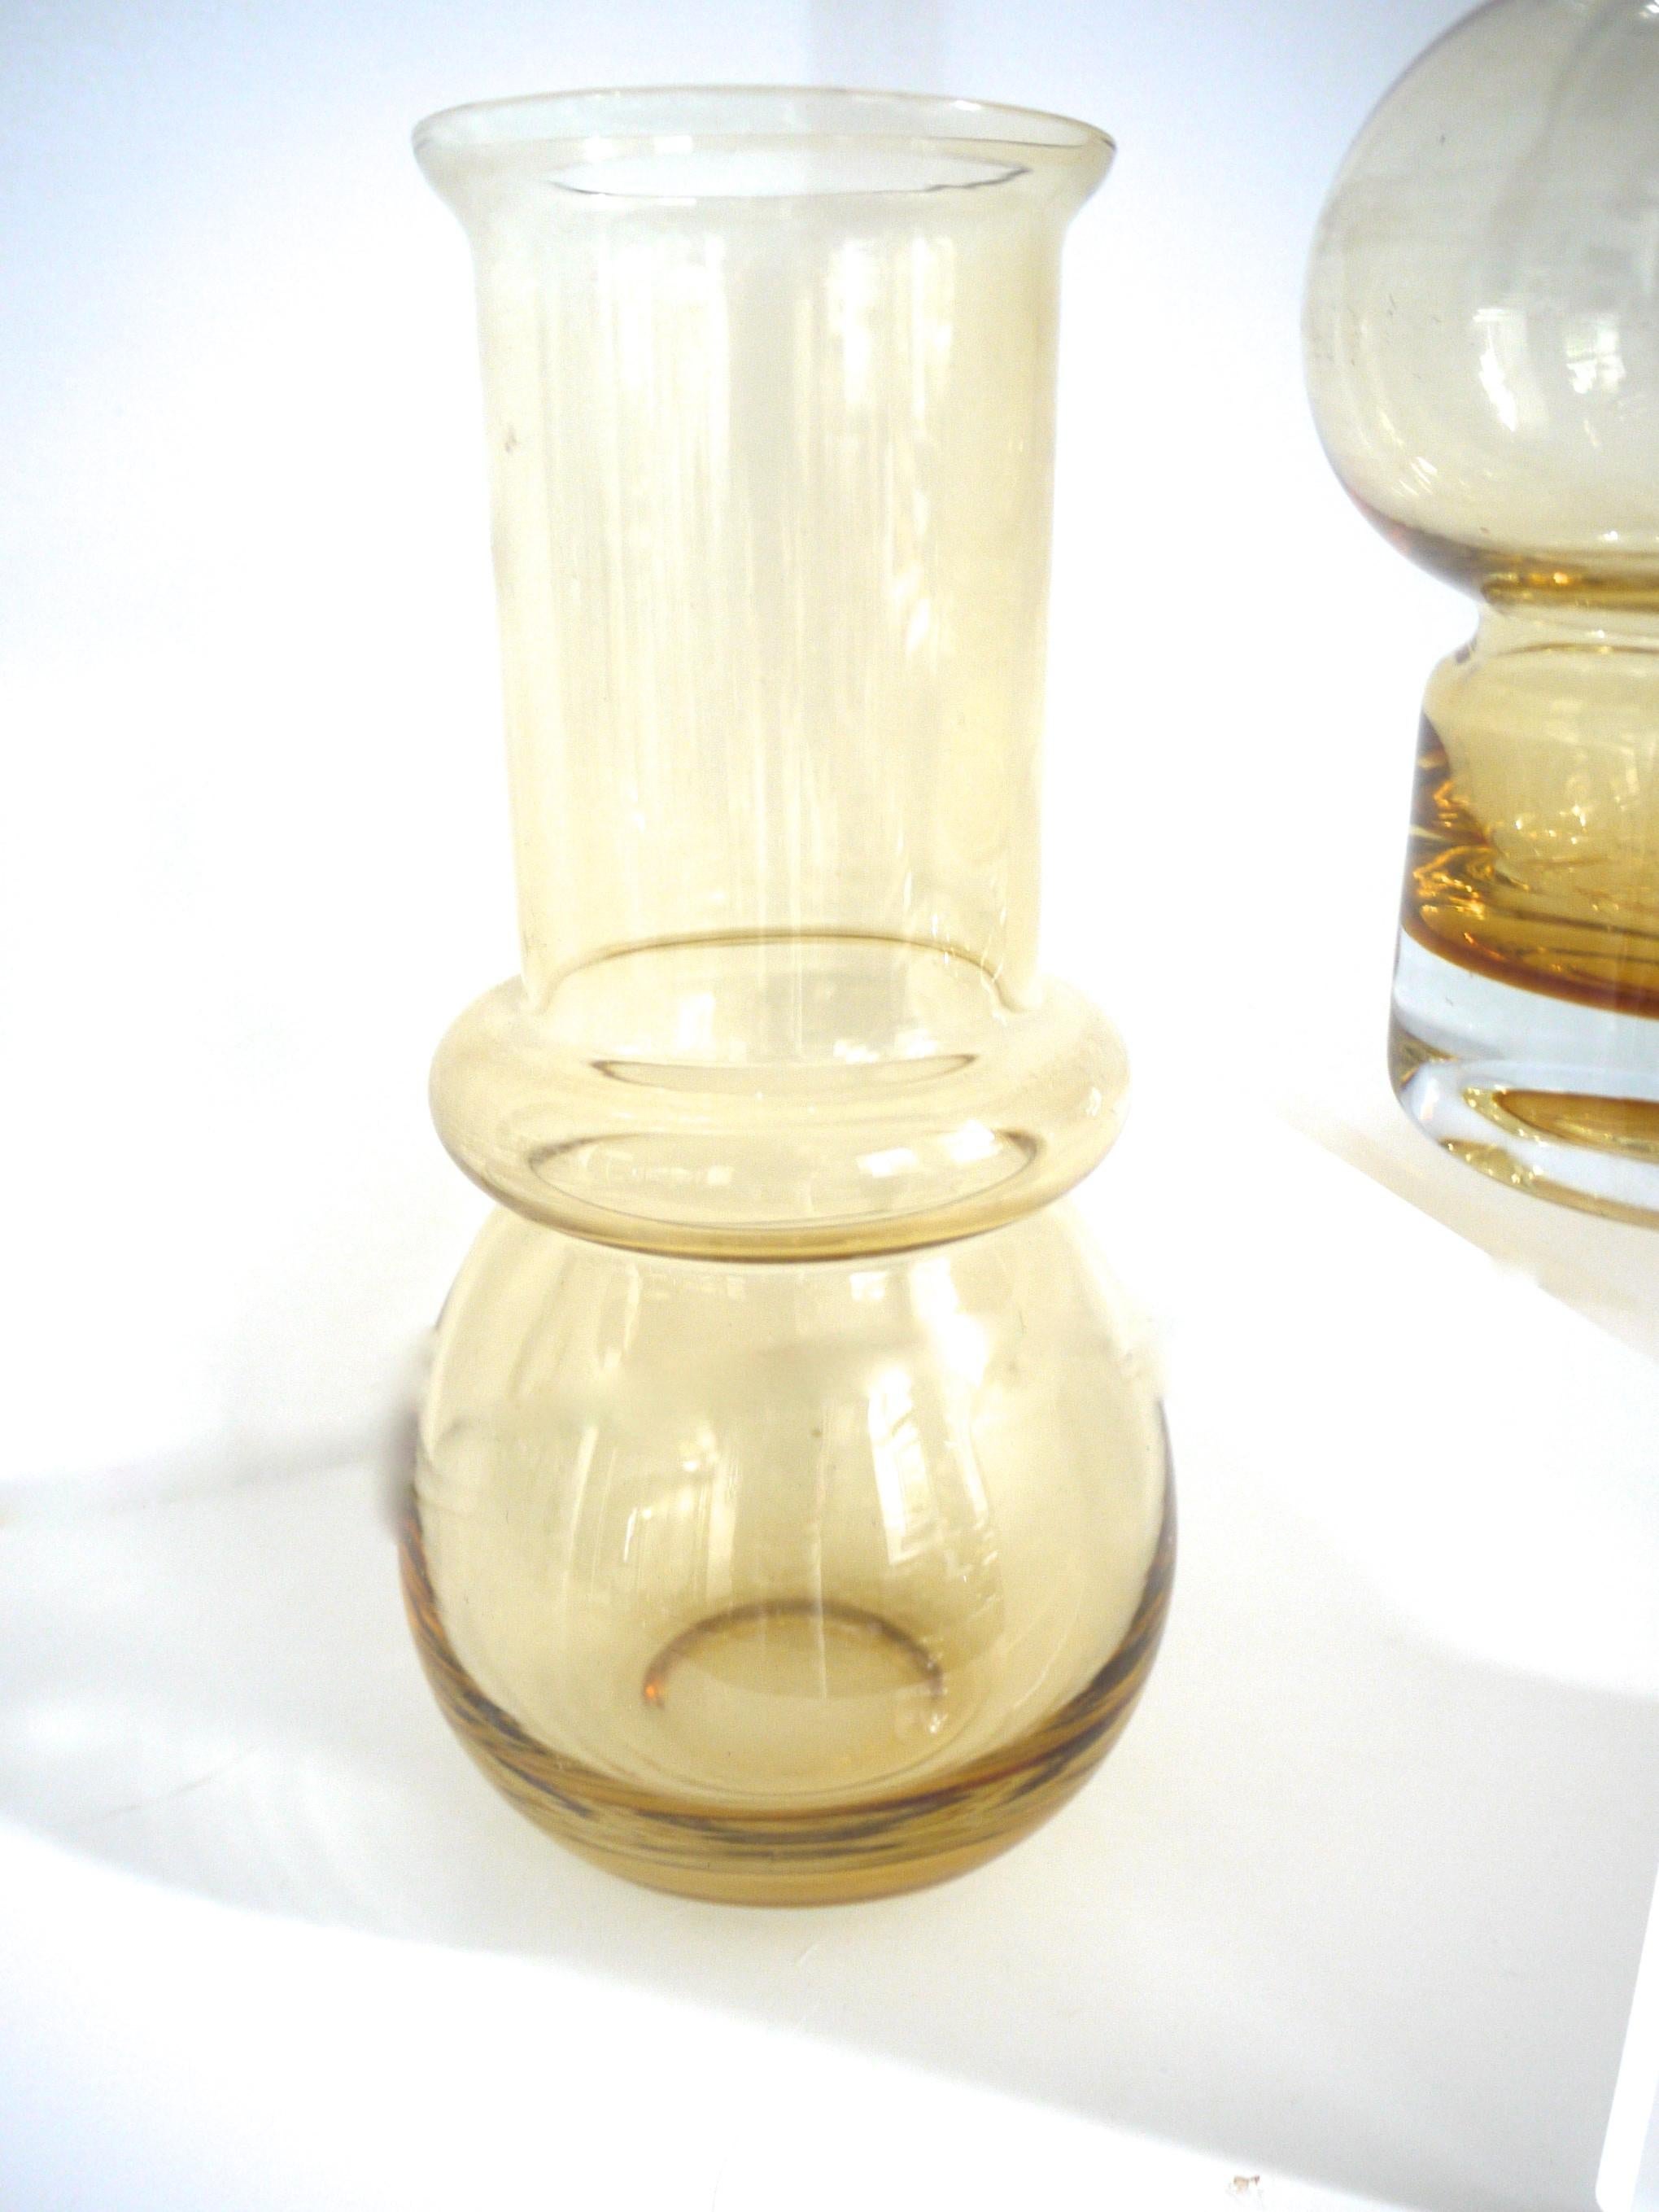 Pair of hooped vases from Riihmaen Lasi, late 1950s, Finland in 1910

Riihimäkem Lasi part of the reputed glass company in Riihimäki, Finland, in operation from 1910 when it was founded by Mikko Adolf Kolehmainen, to 1990 when the factory was